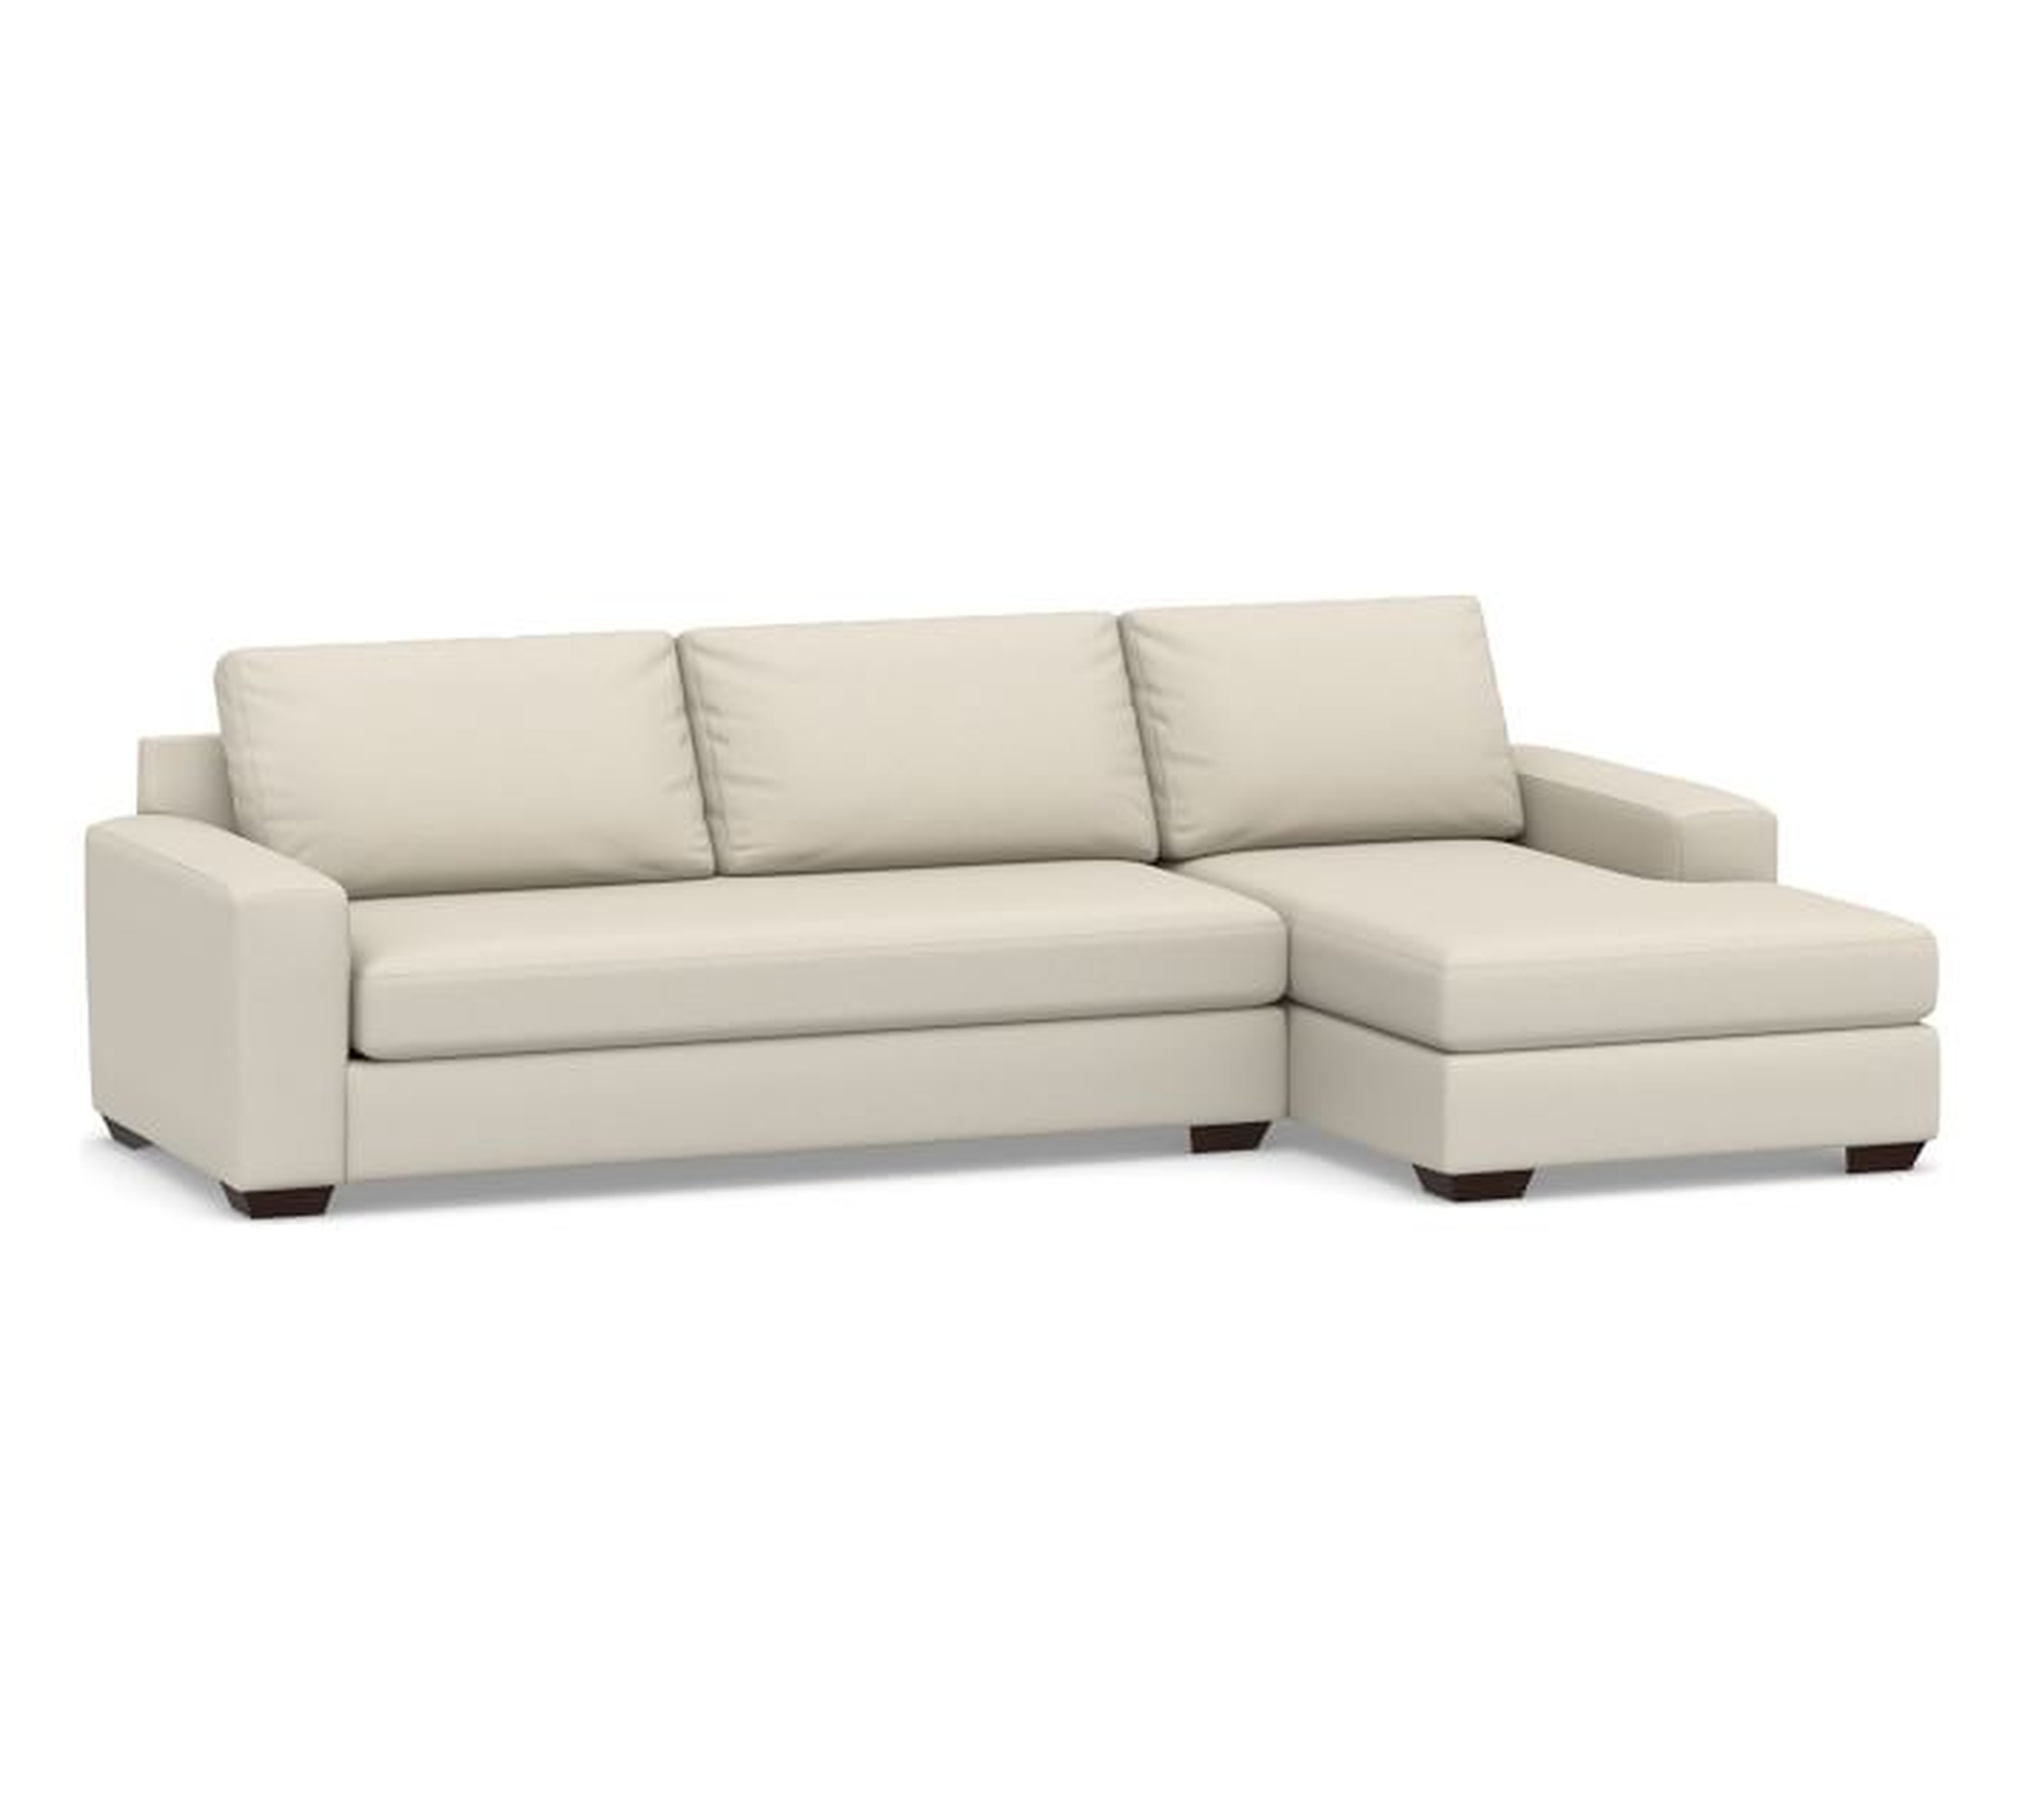 Big Sur Square Arm Upholstered Sofa Chaise Sectional, left arm sofa, right arm chaise,  bench seat - Pottery Barn